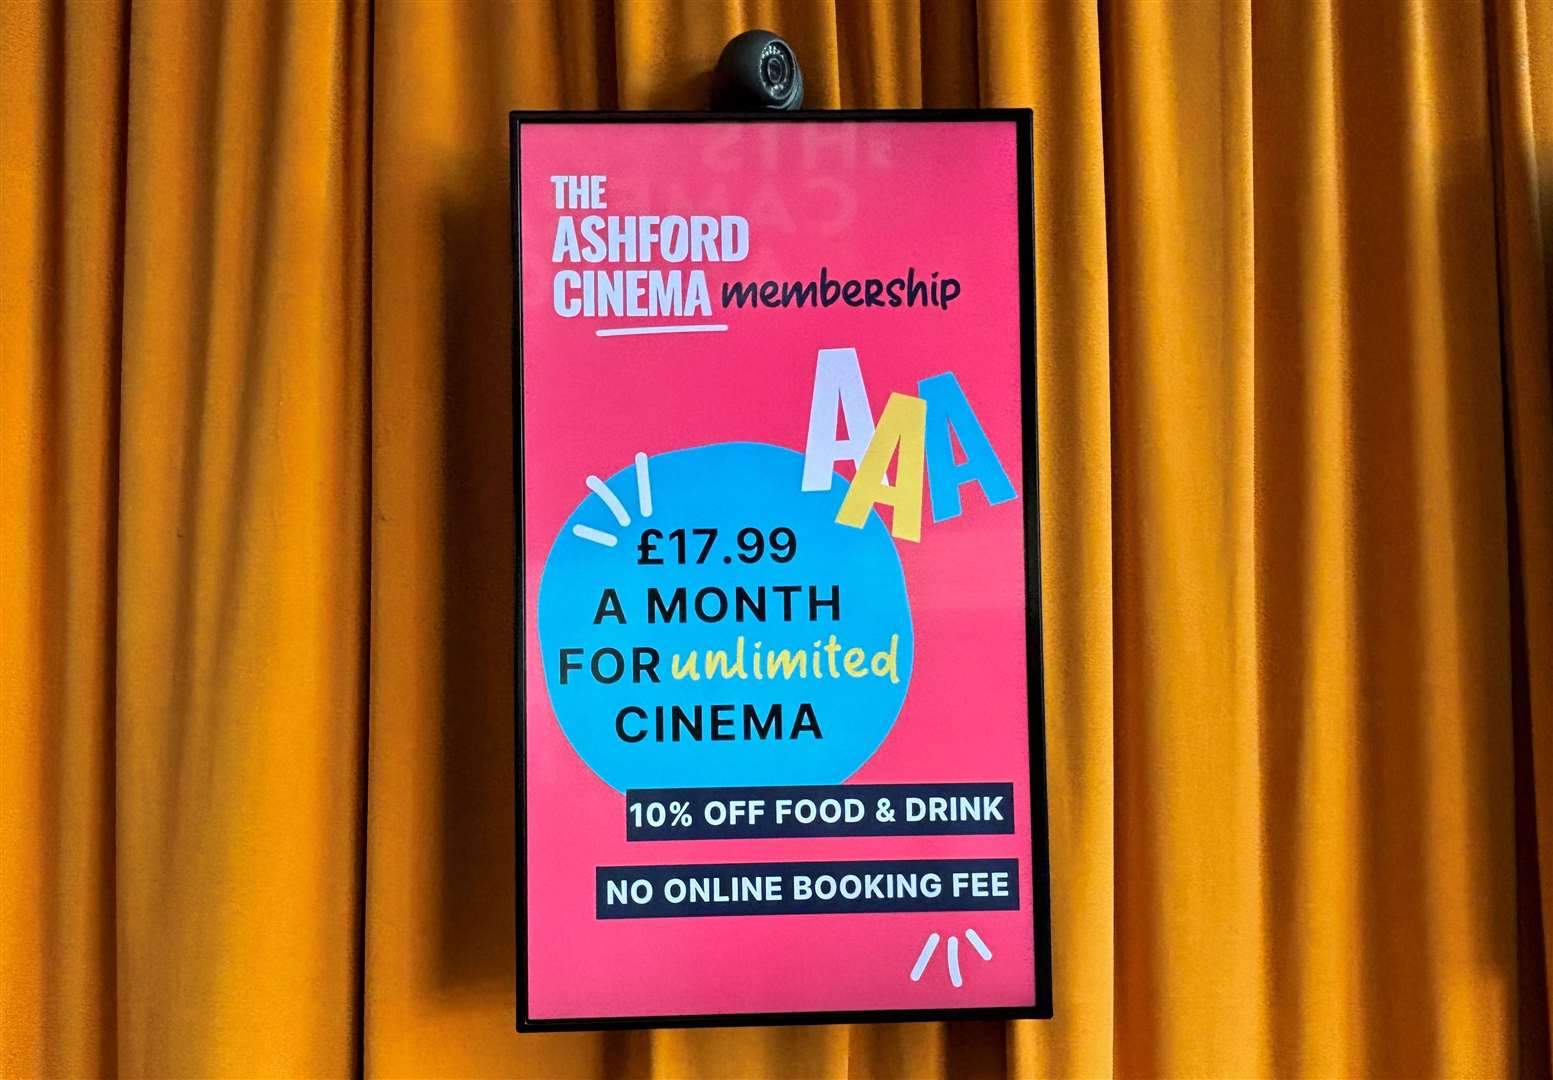 Bosses have set new ticket prices at The Ashford Cinema